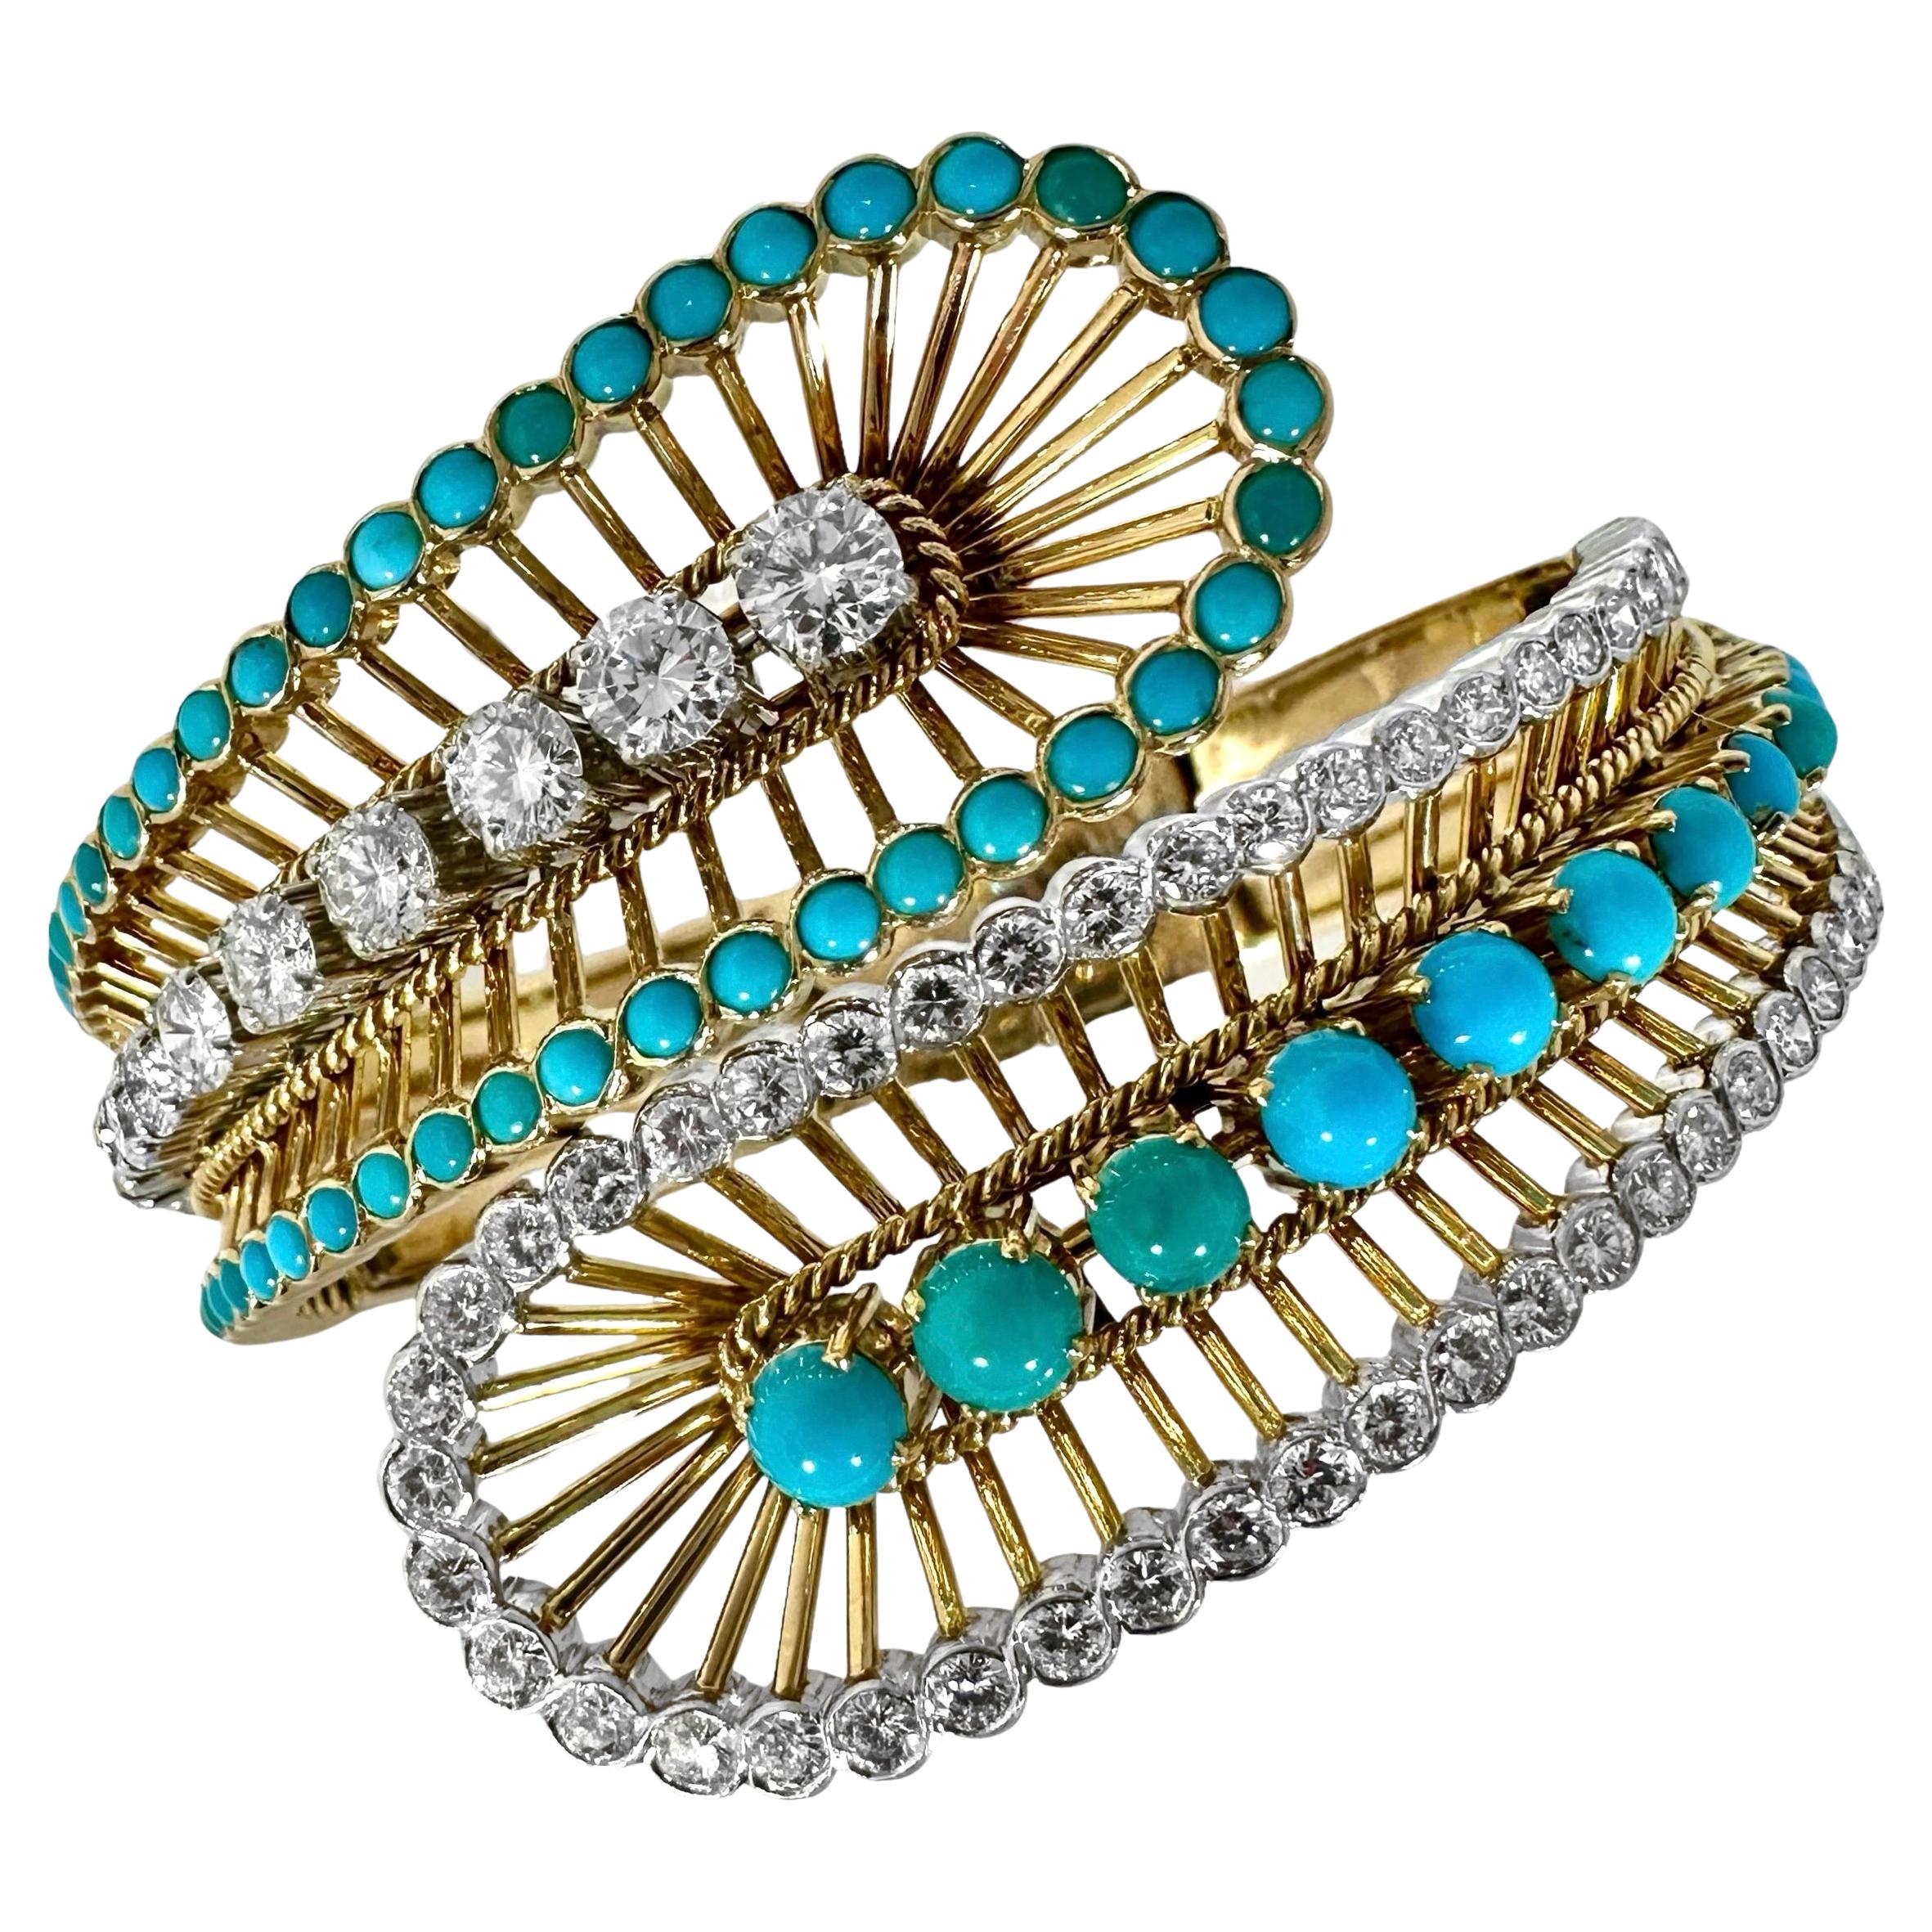 Elegant Wide Bypass Cuff in Gold, Turquoise & Diamonds by Greek Maker VOURAKIS 